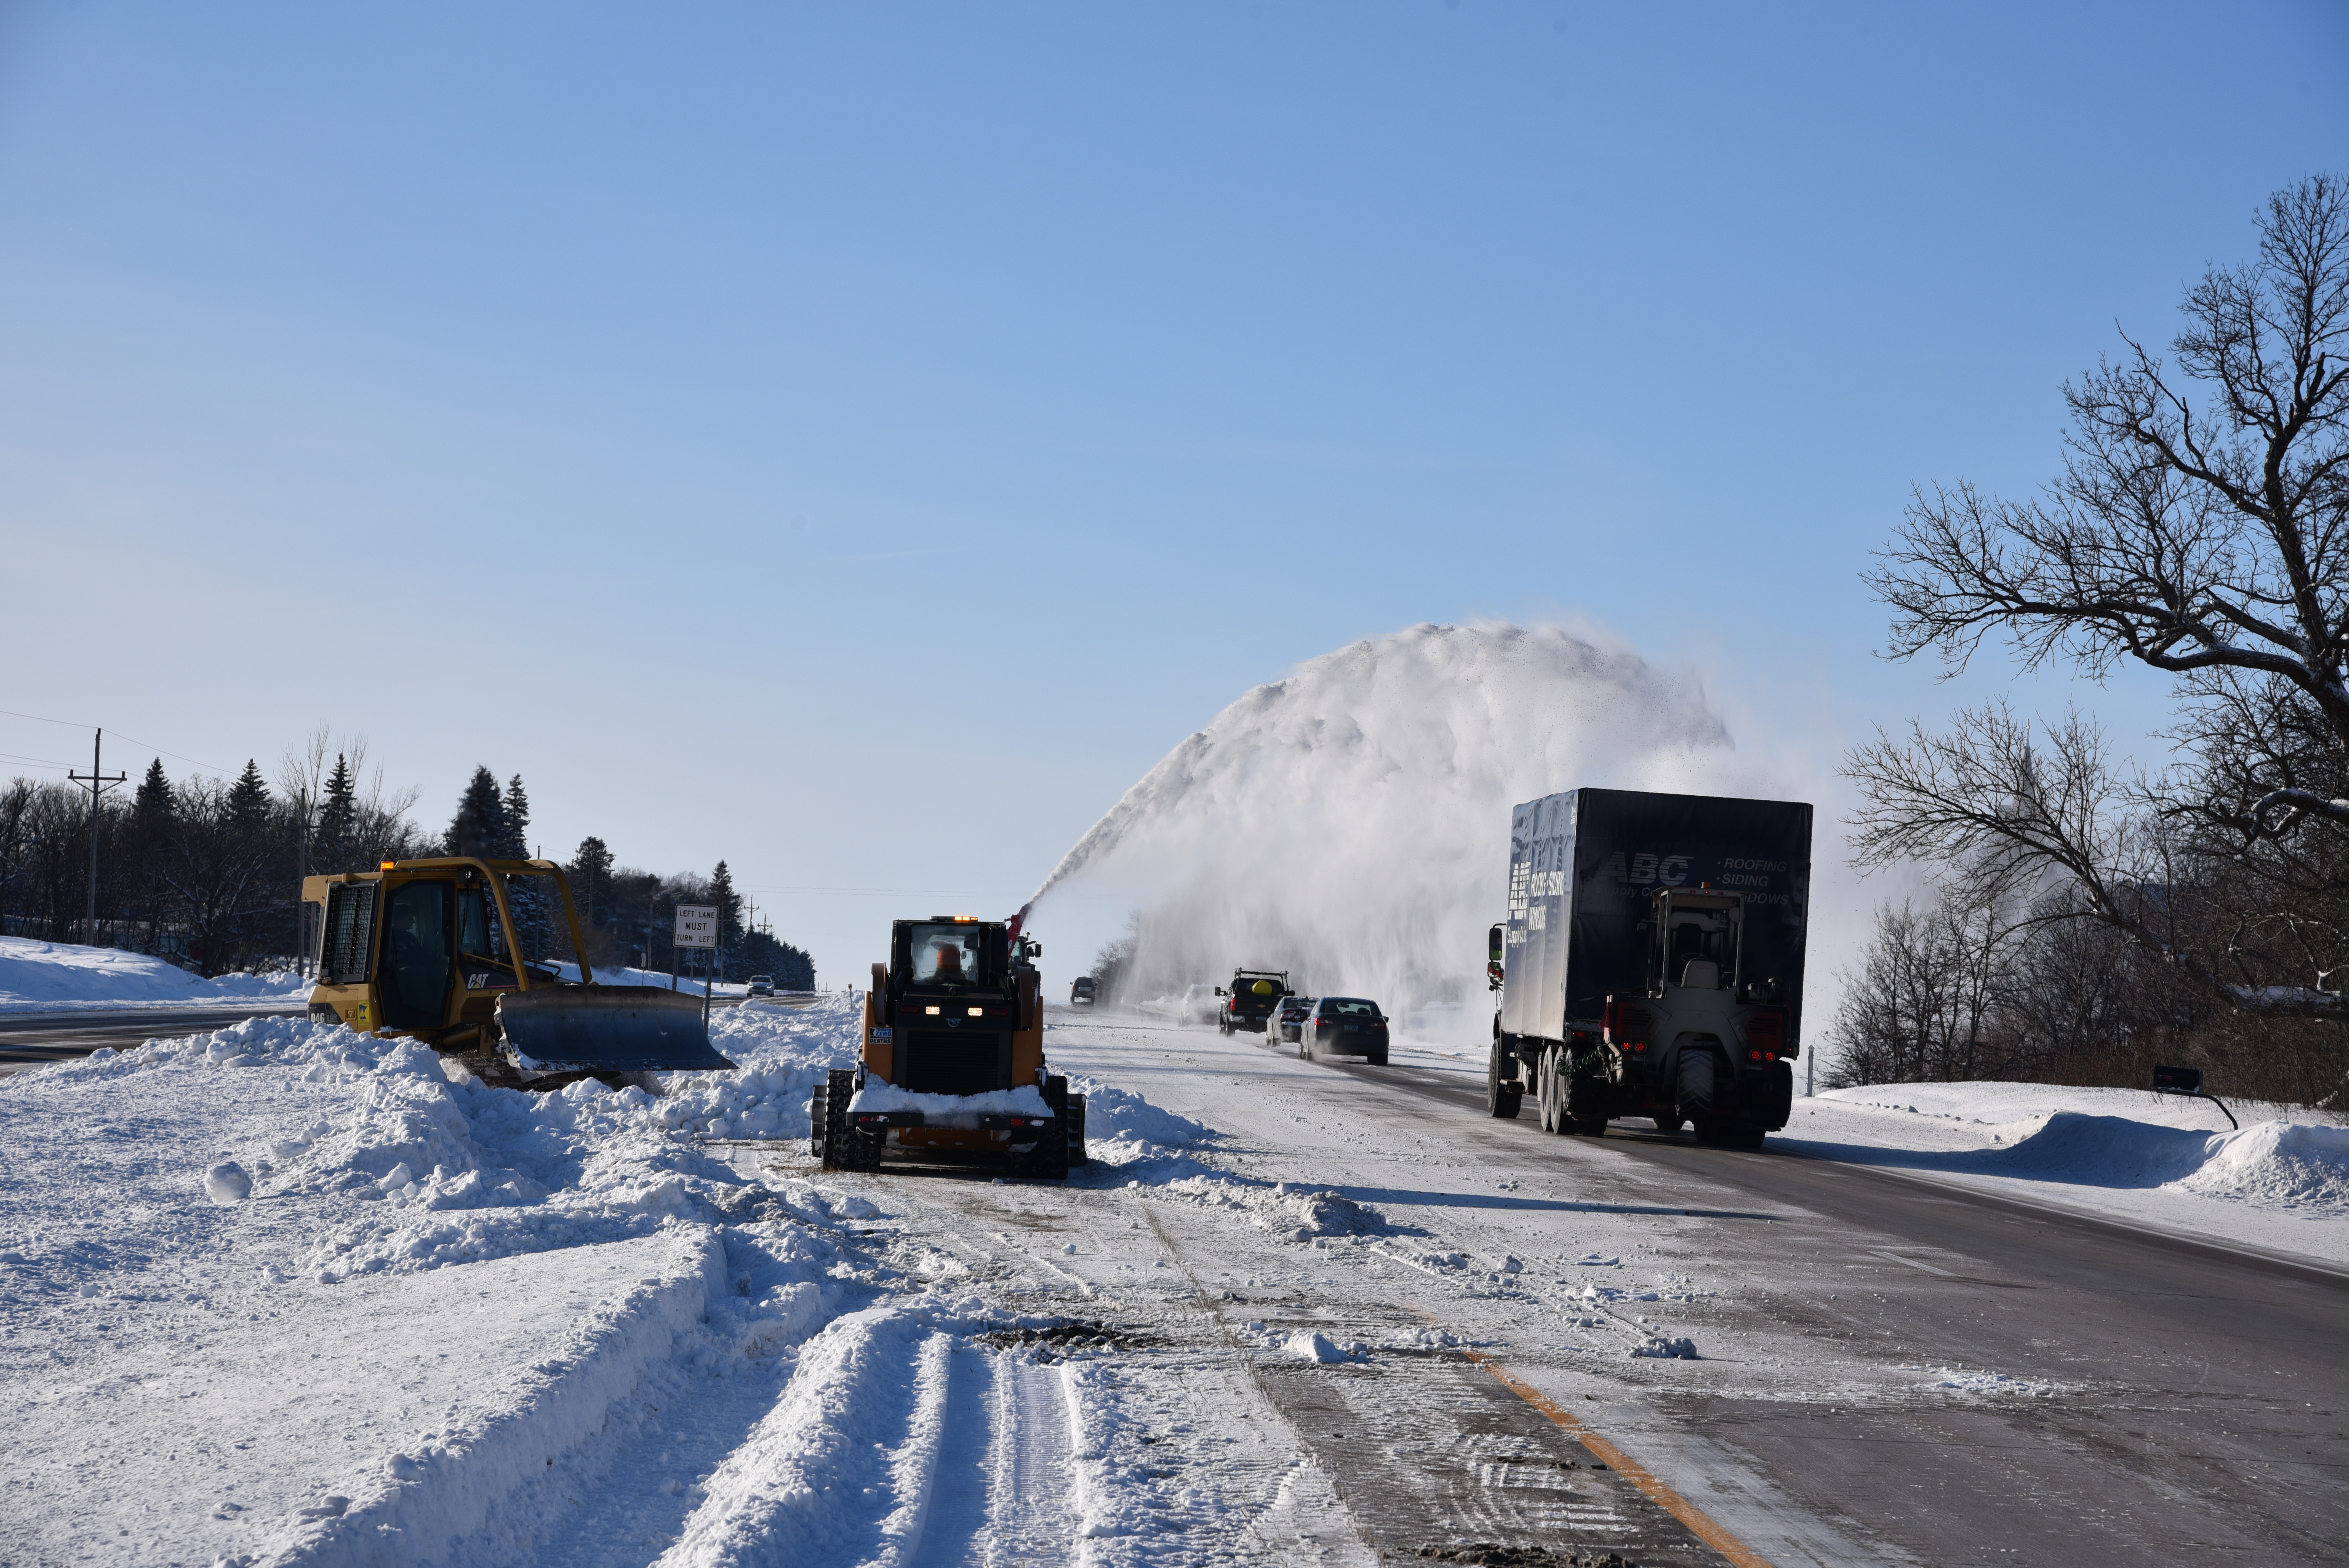 Photo: a snow blower unit clears snow from a highway median in District 4 in order to create more space for the snow that was forecasted to fall the next day.